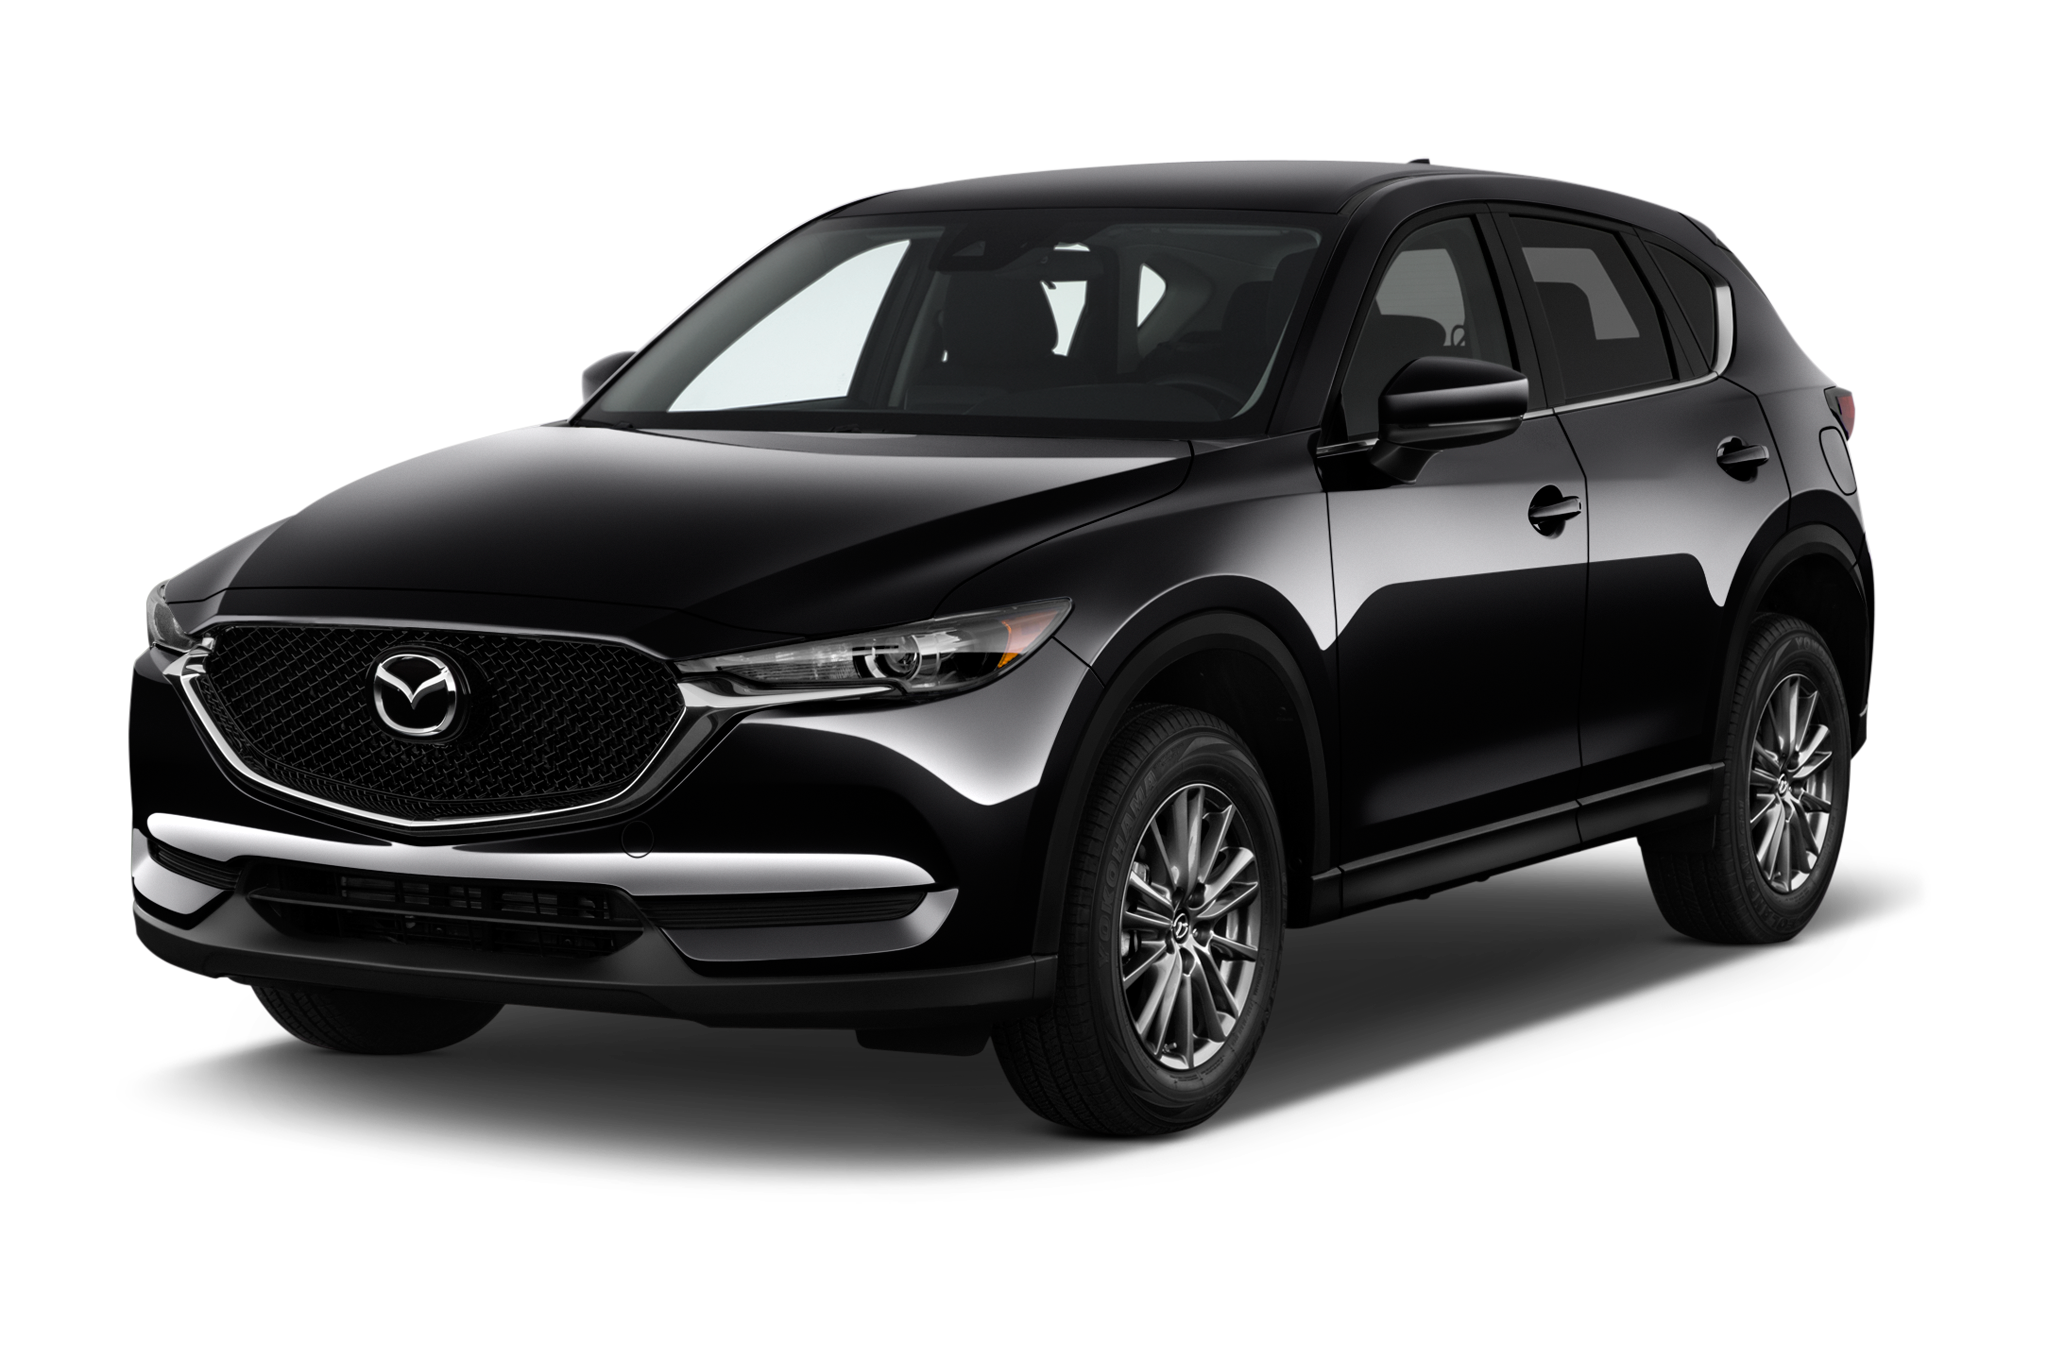 2018 Mazda CX-5 Specs and features - MSN Autos